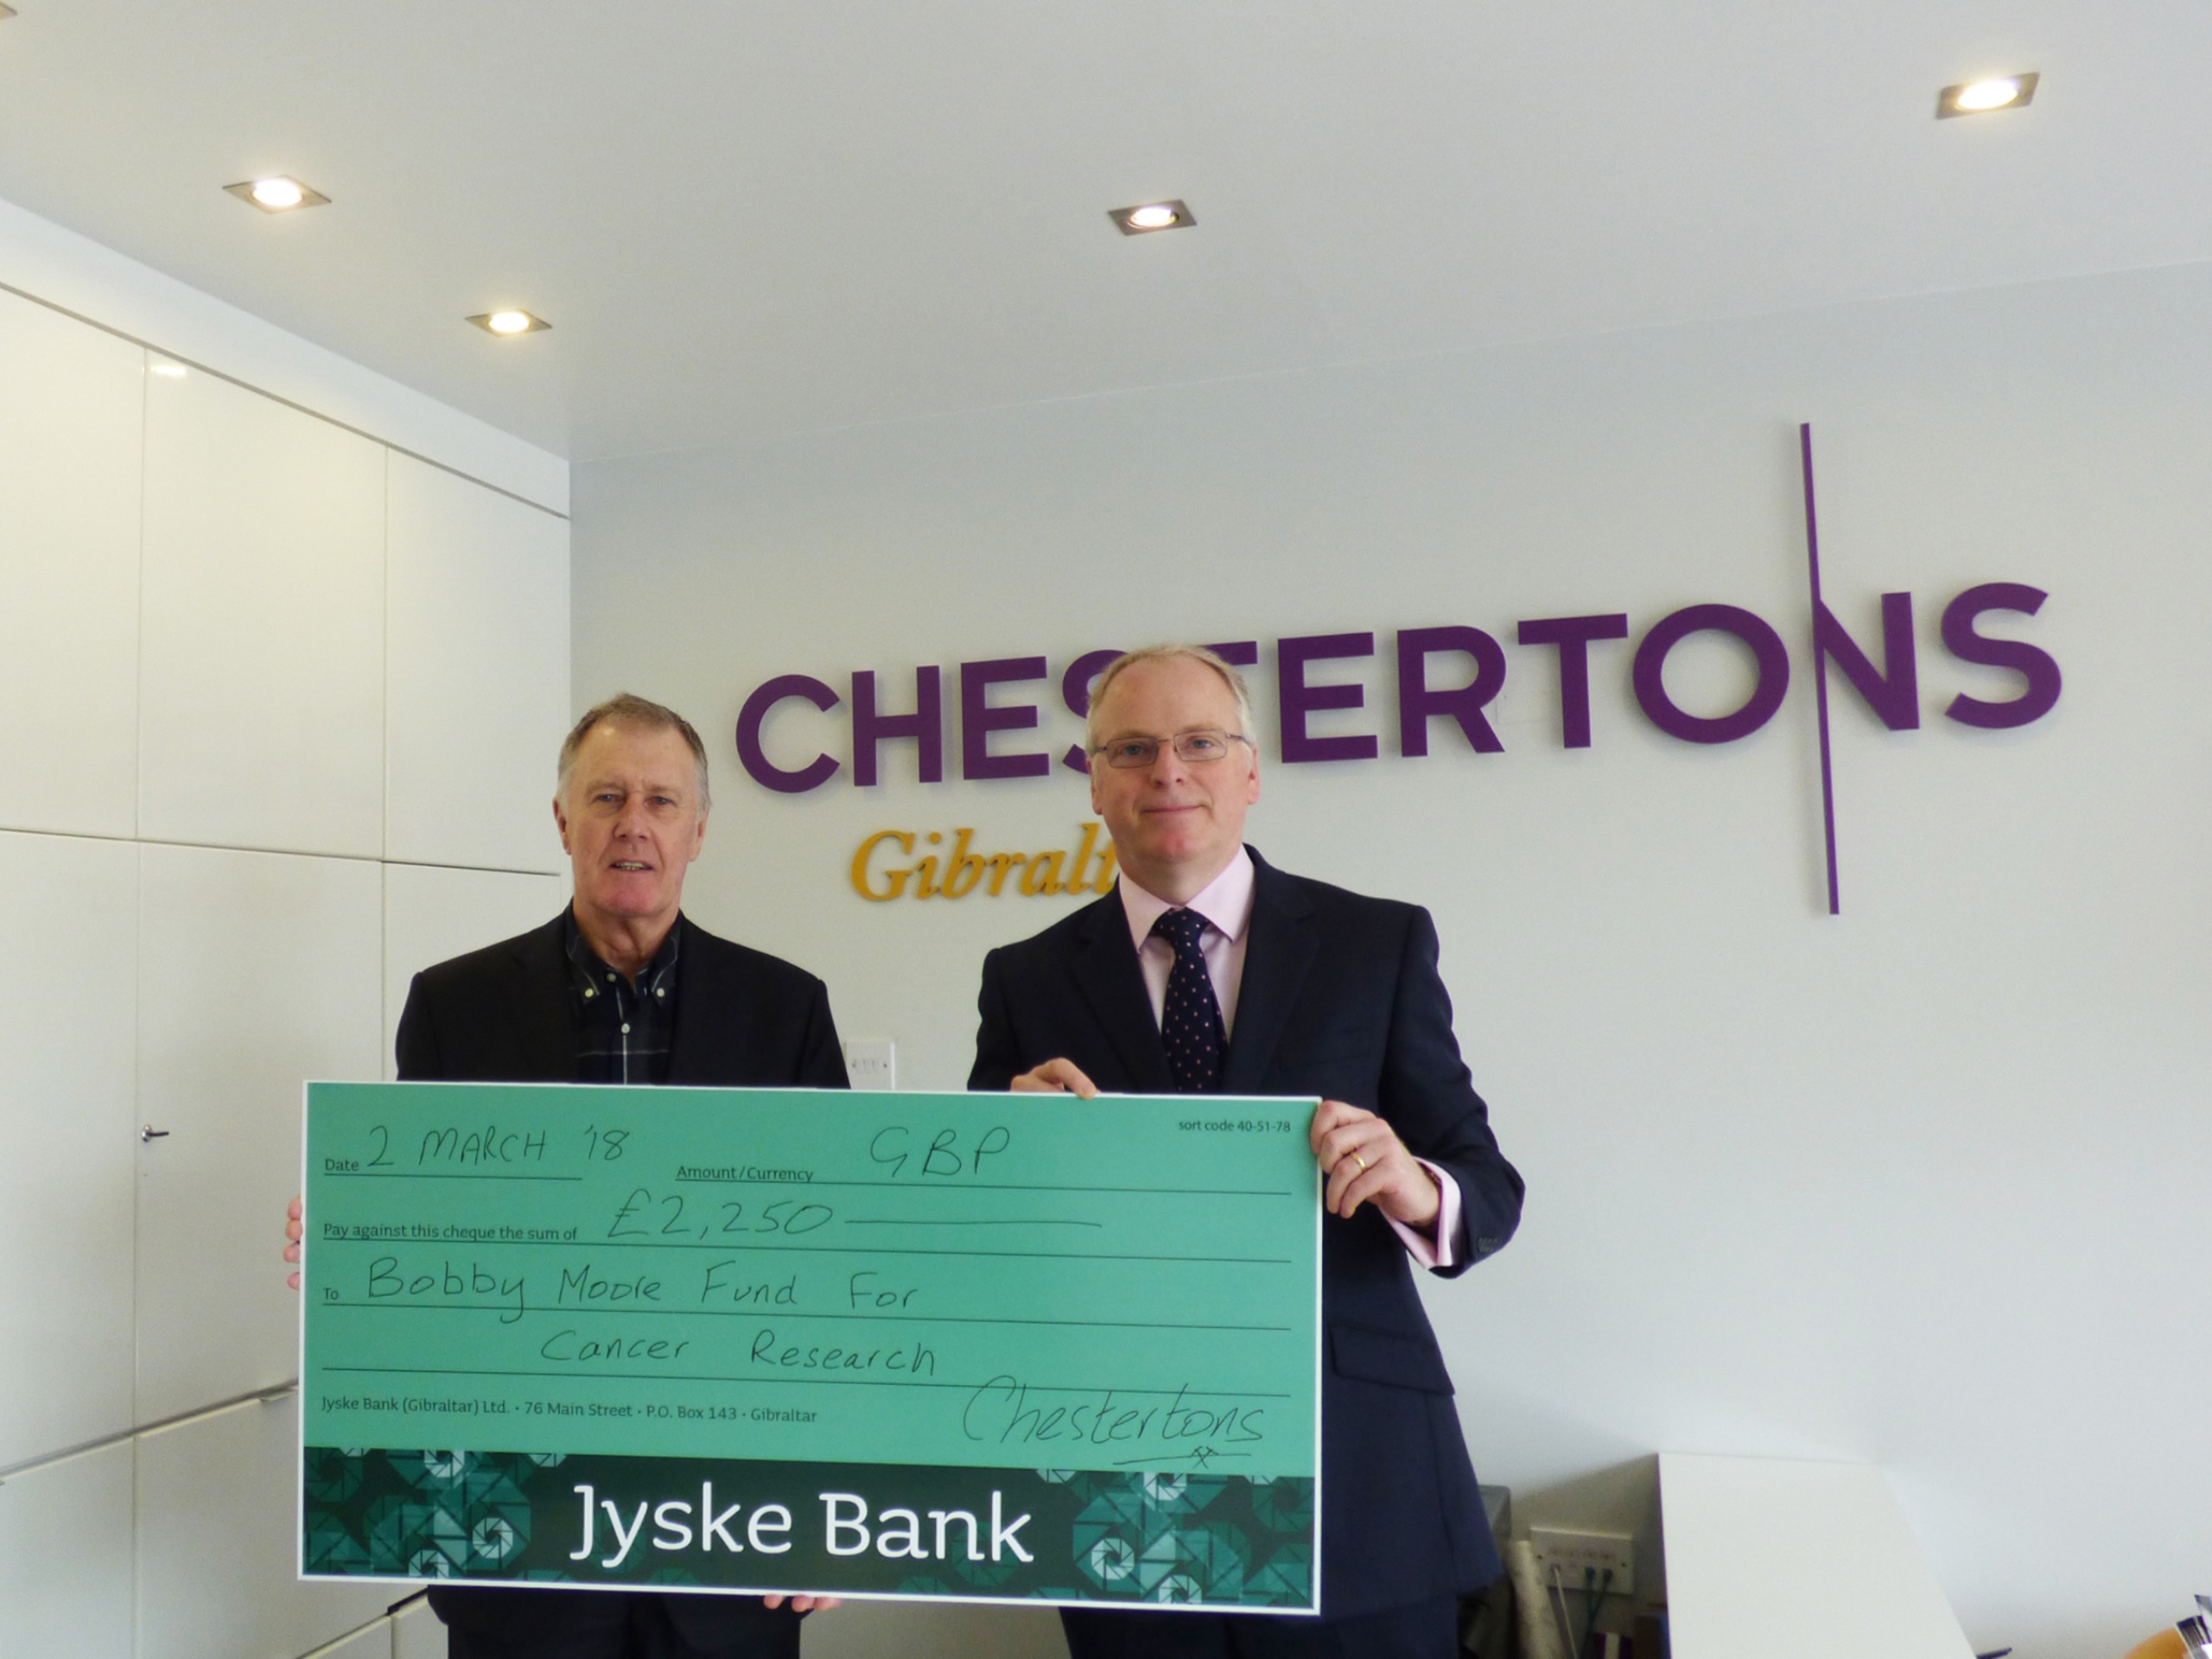 Chestertons' 10th anniversary raises £4,500 for cancer charities Image